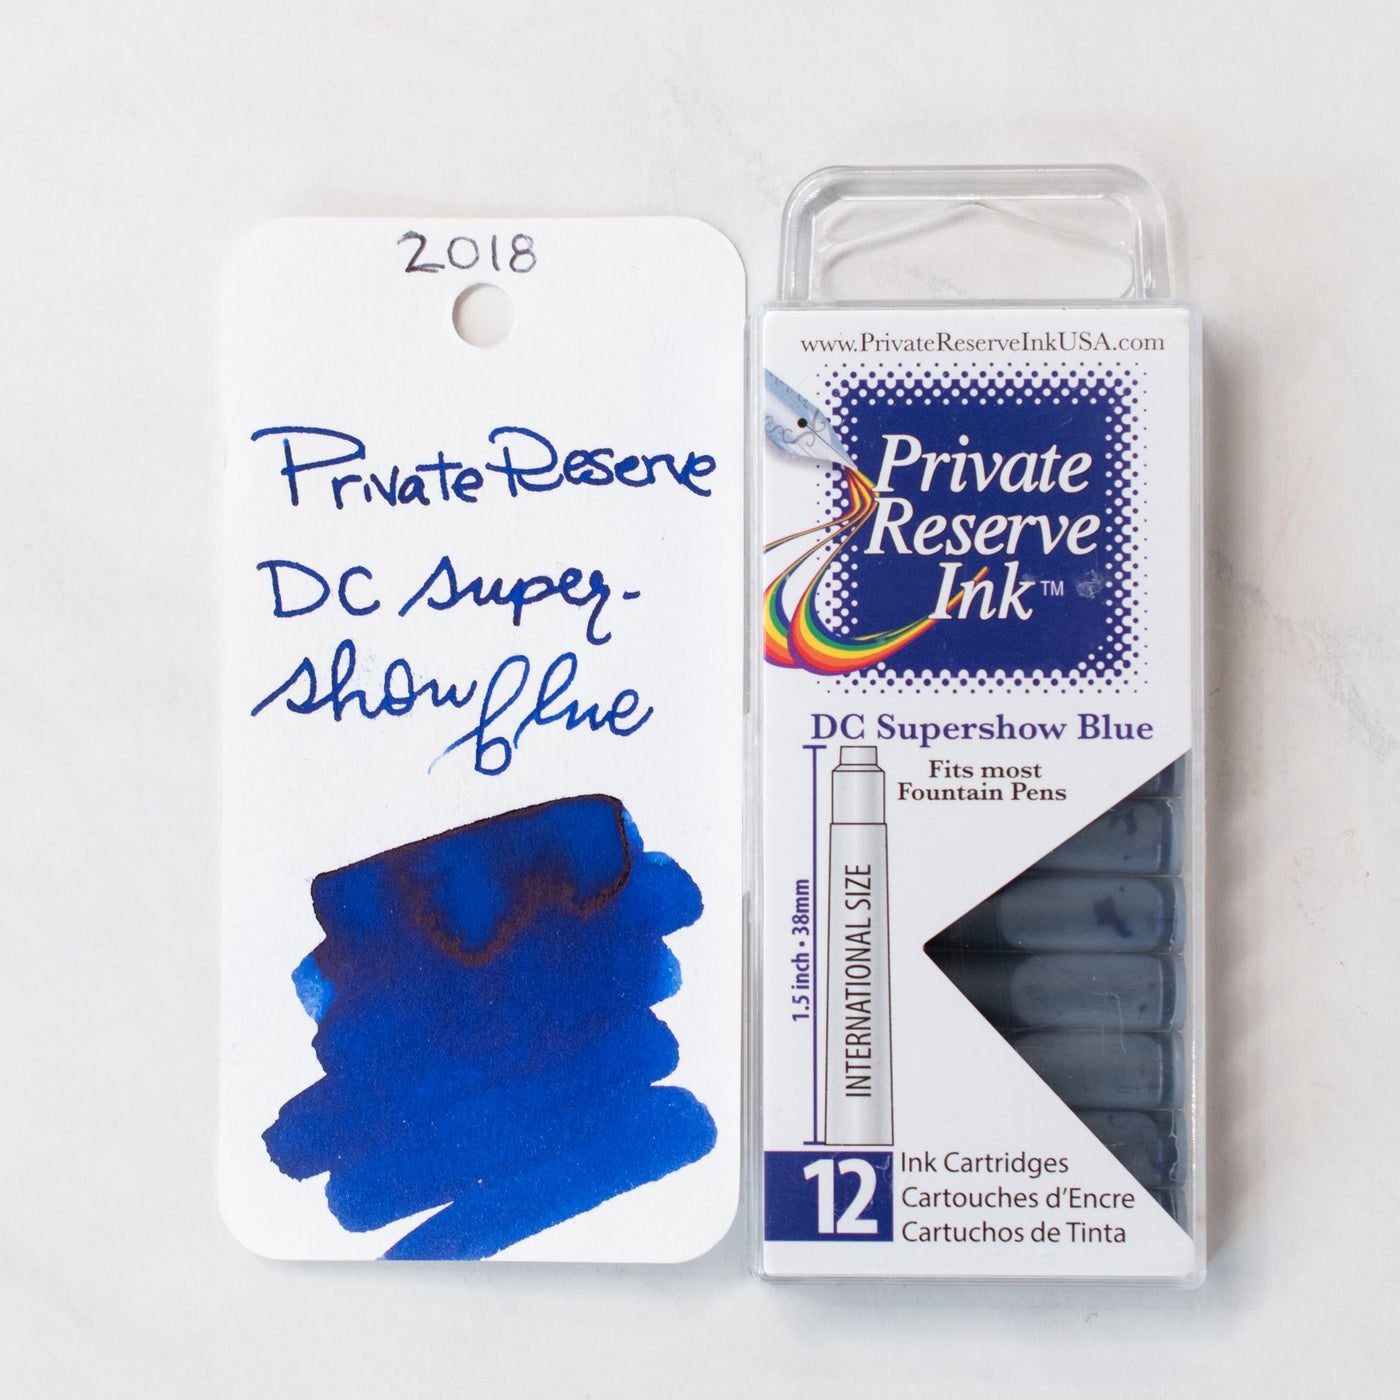 Private Reserve DC Supershow Blue 2018 Ink Cartridges